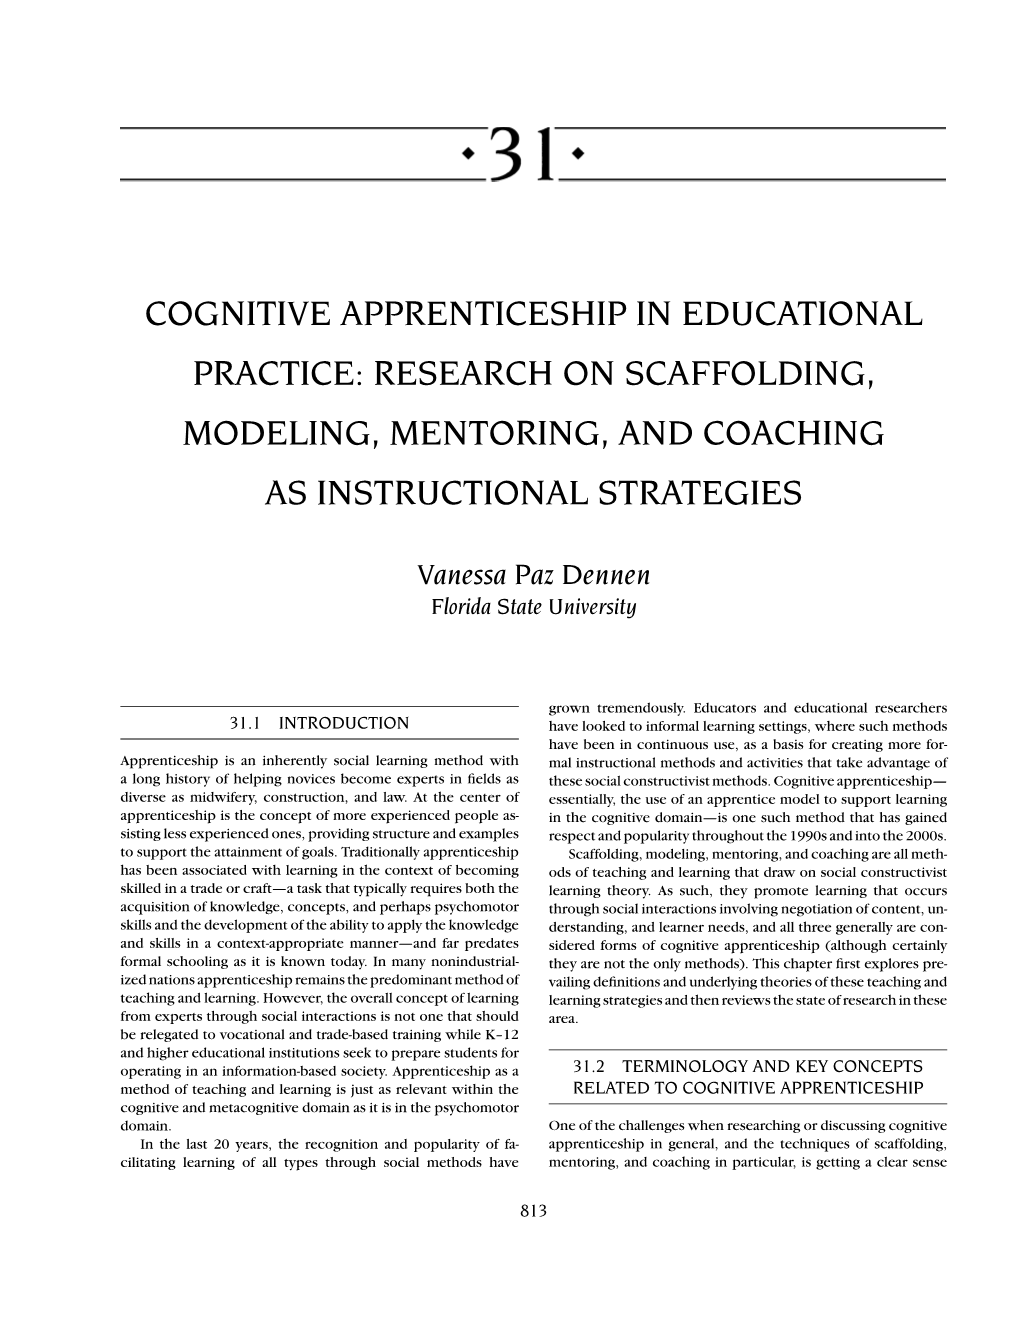 Cognitive Apprenticeship in Educational Practice: Research on Scaffolding, Modeling, Mentoring, and Coaching As Instructional Strategies